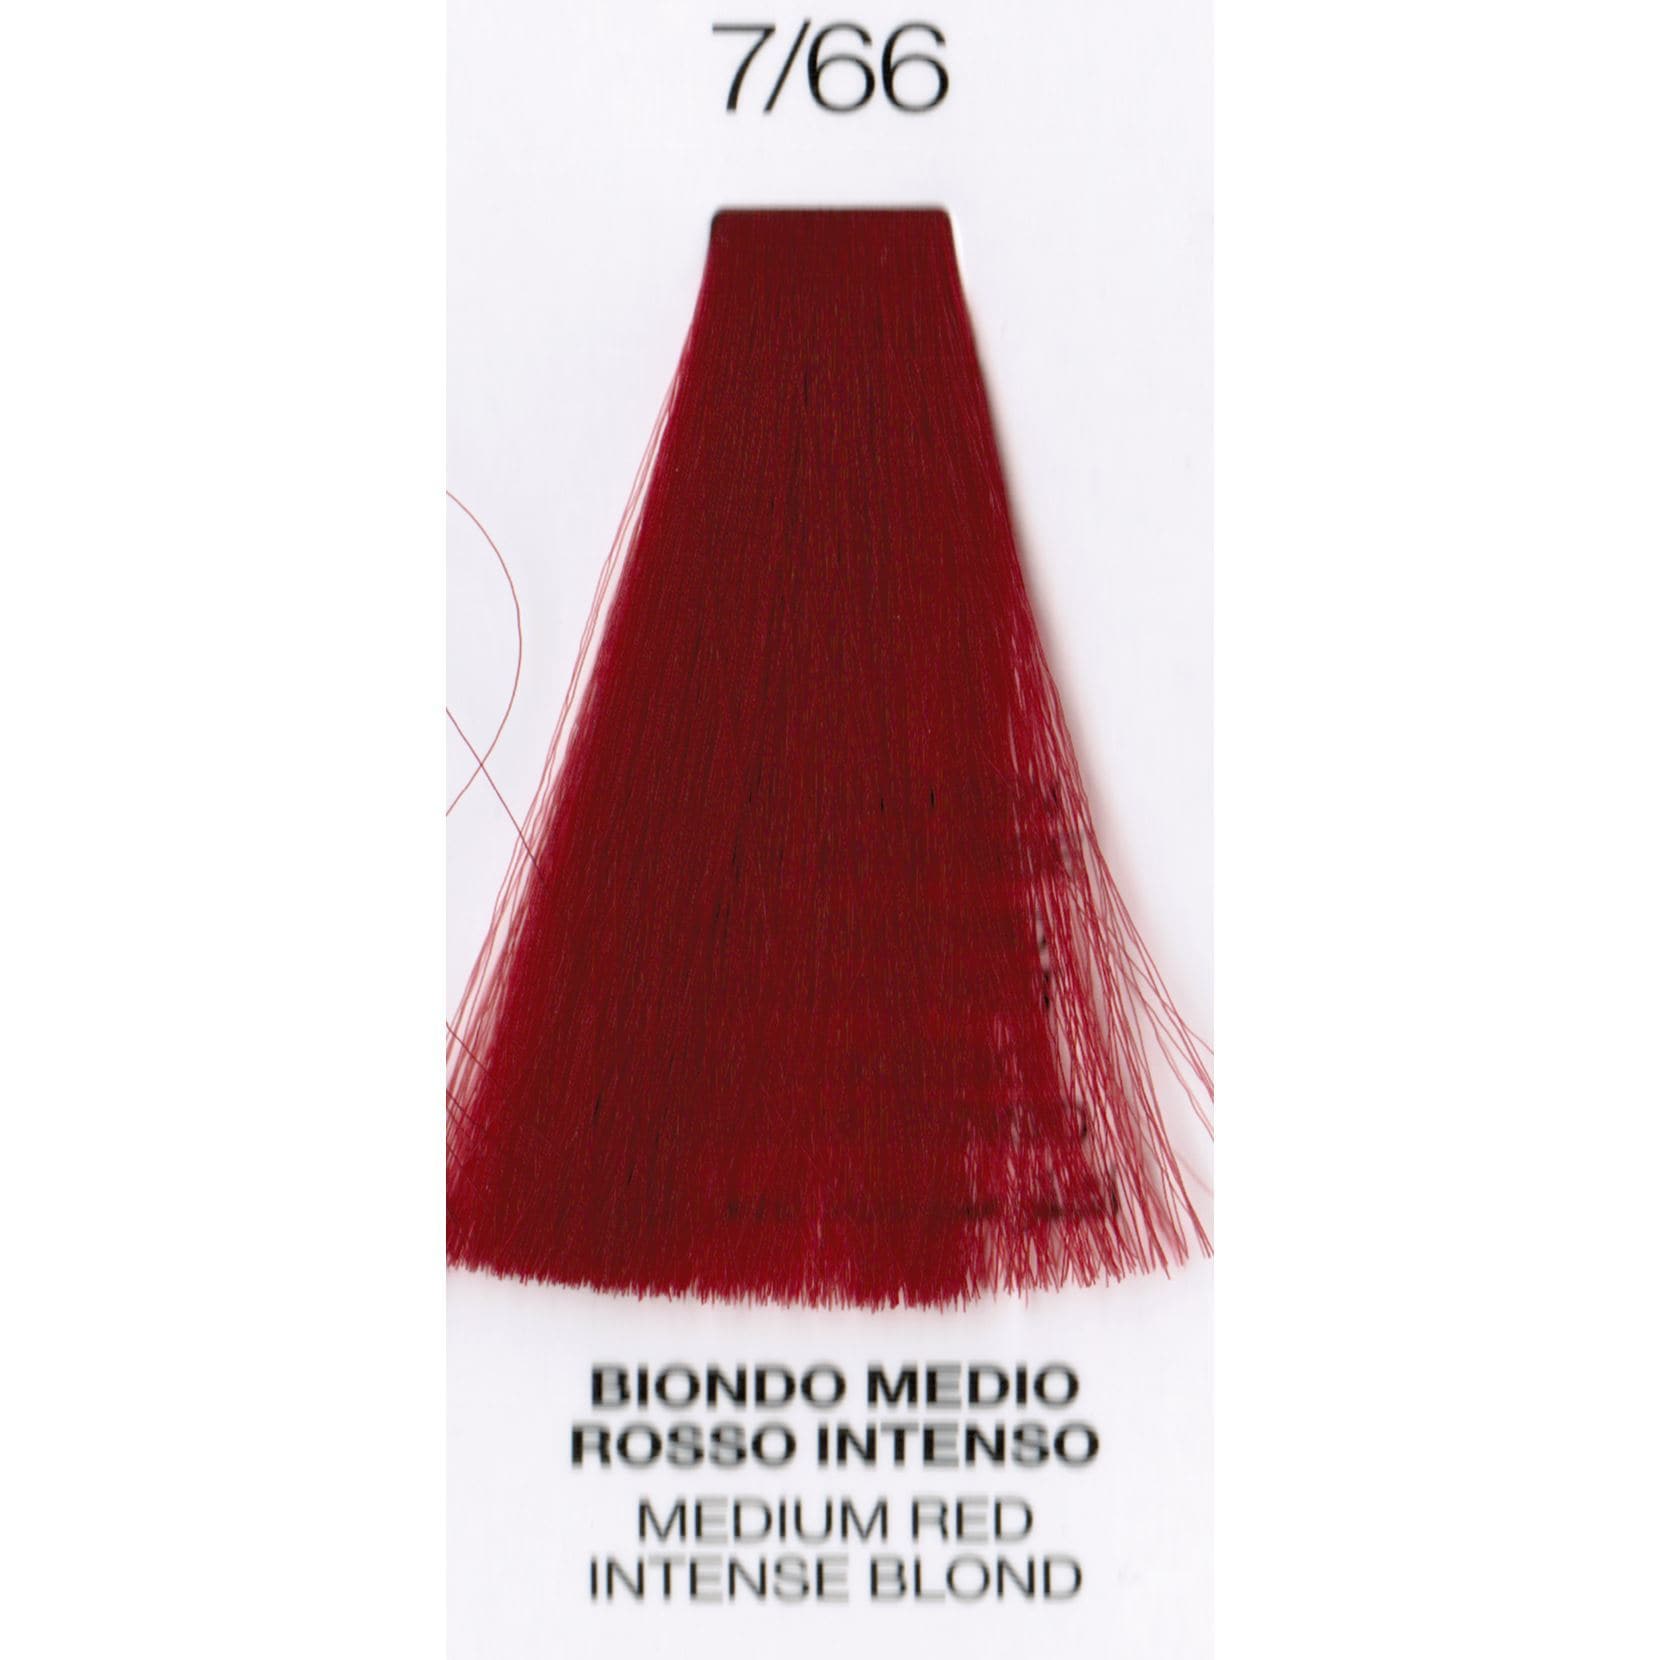 7/66 Medium Red Blonde Intense | Ammonia-Free Permanent Hair Color | Purity | OYSTER - SH Salons